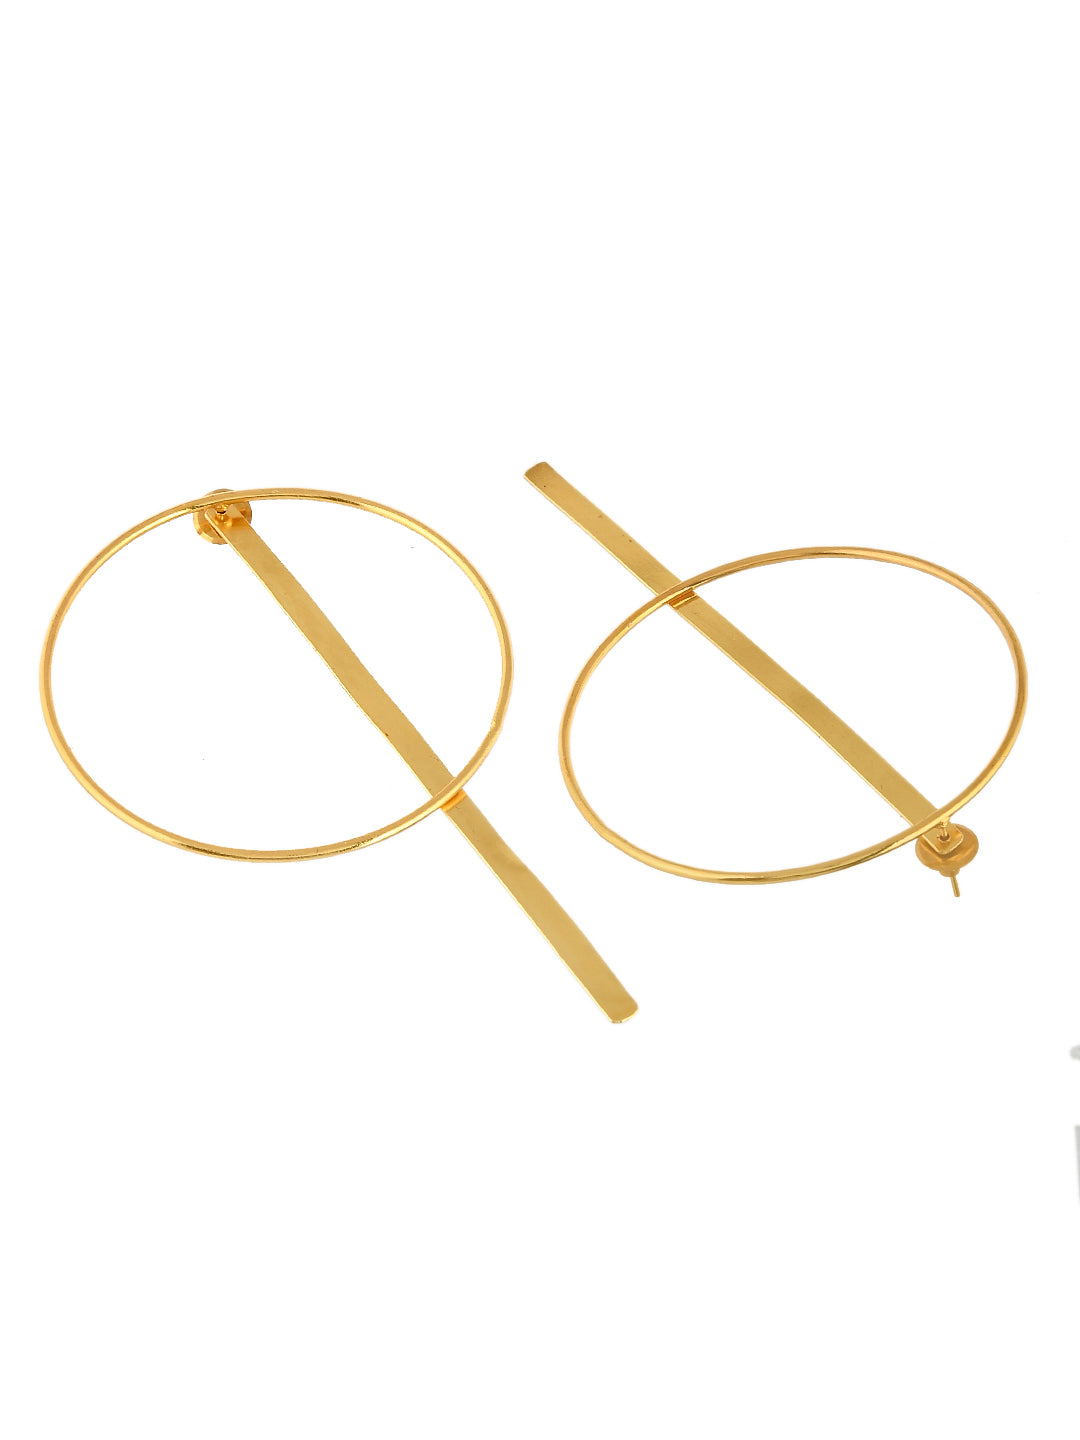 Contemporary Gold Plated Circle Of Life Earrings For Girls